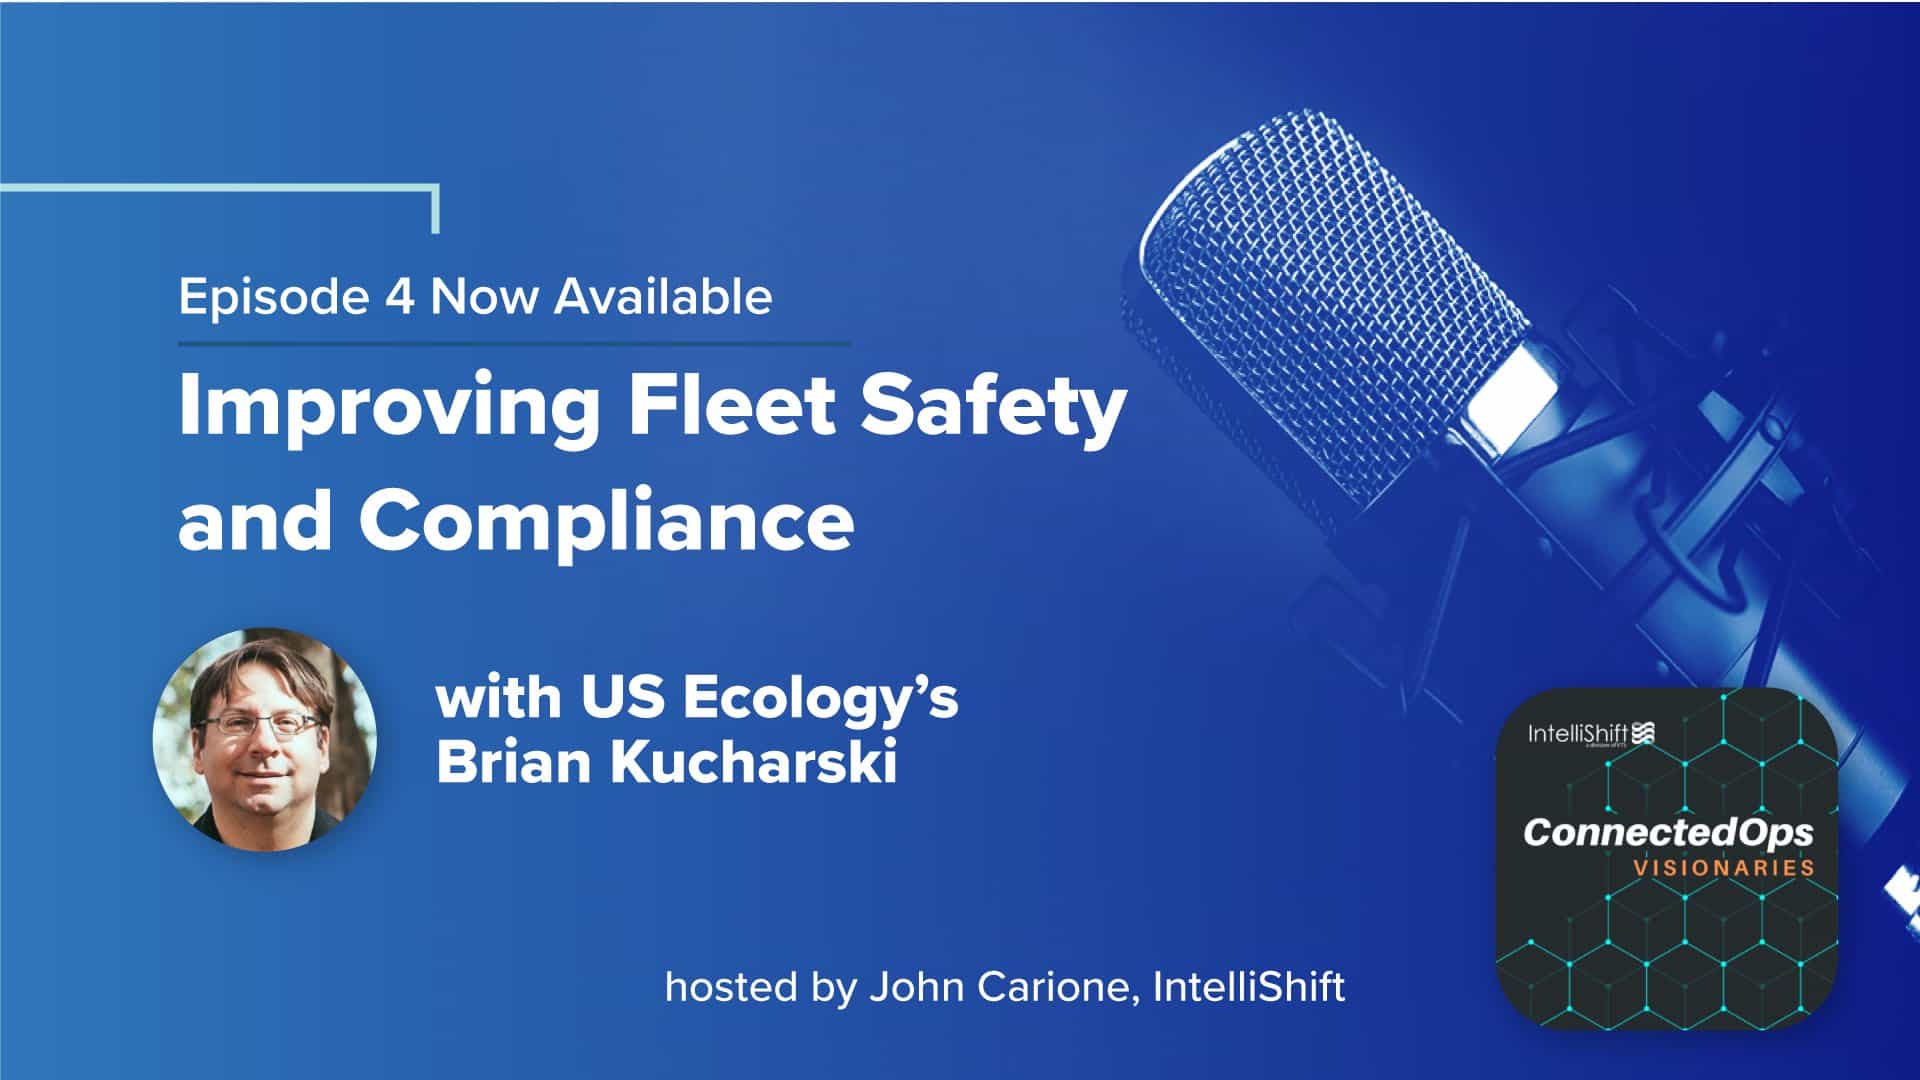 Episode 4: Improving Fleet Safety and Compliance with US Ecology’s Brian Kucharski